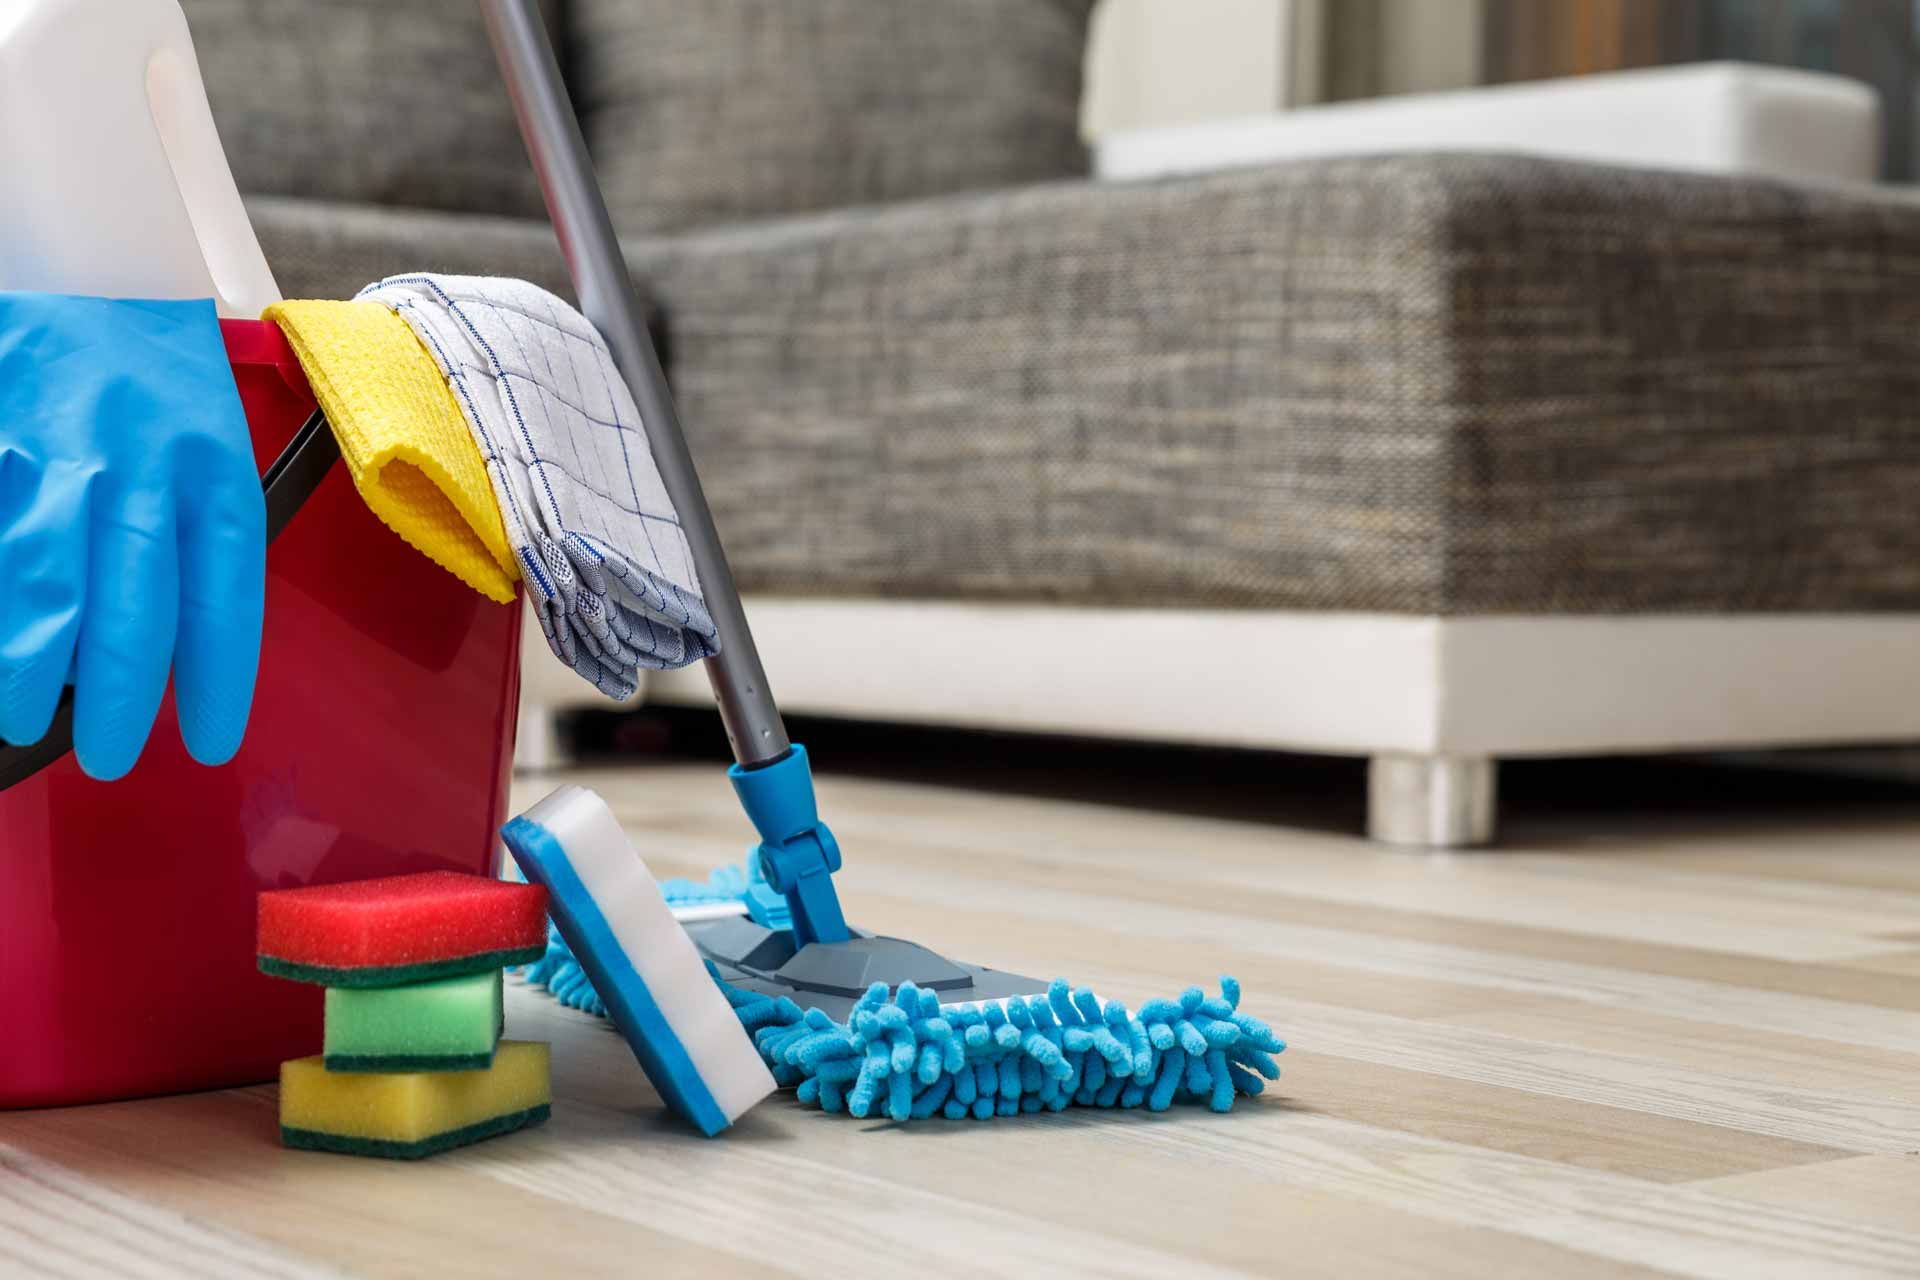 A mop, bucket, sponges, and other cleaning supplies on the floor in front of a couch